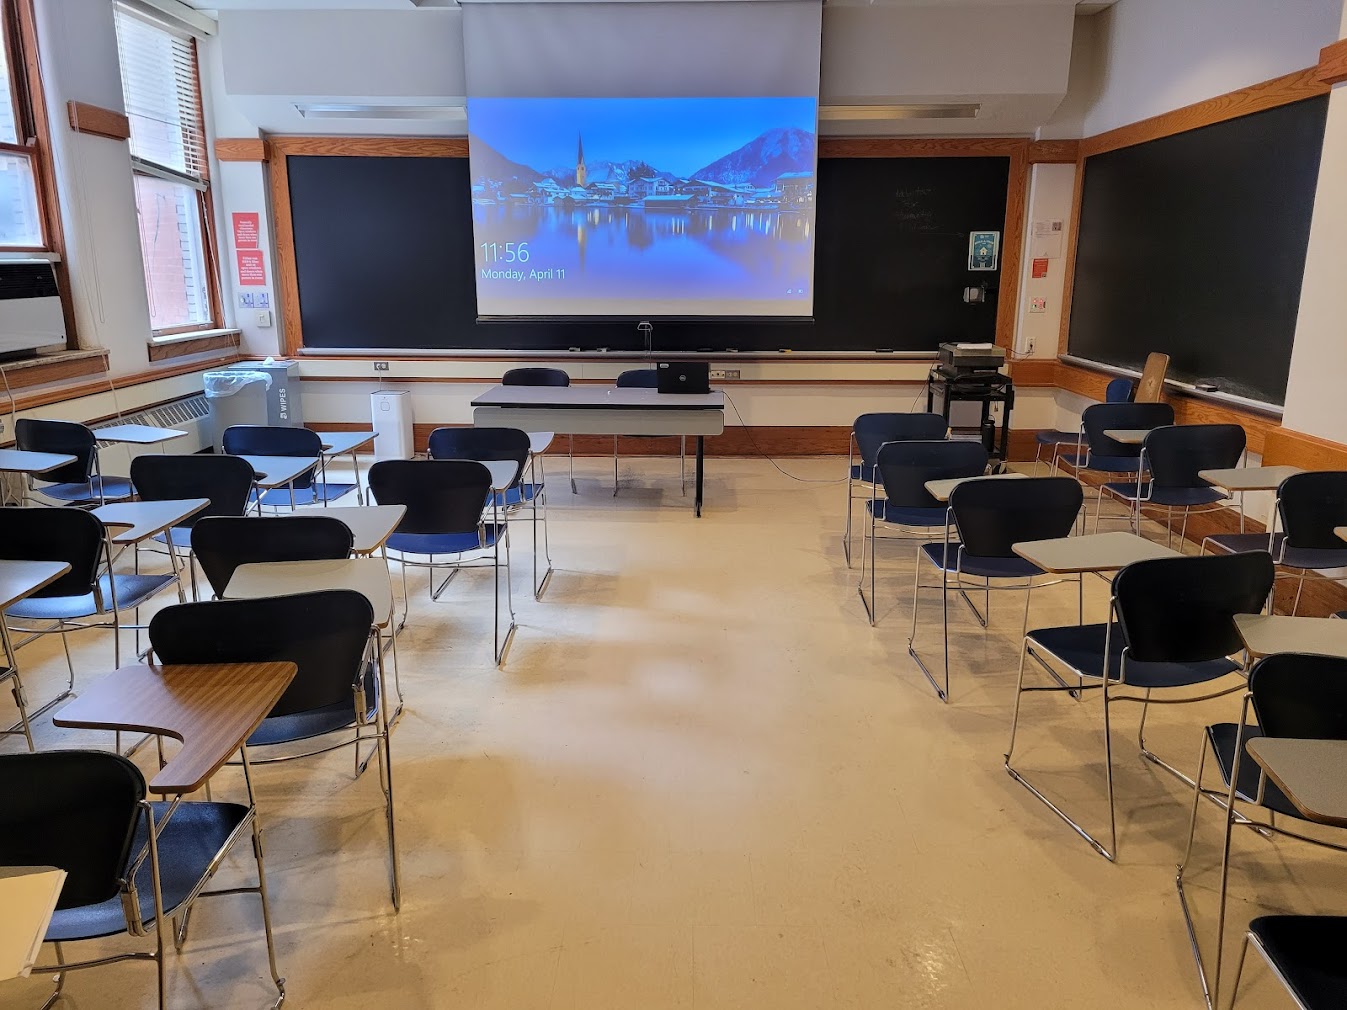 This is a view of the room with student desks, a front lecture table, and a chalkboard.